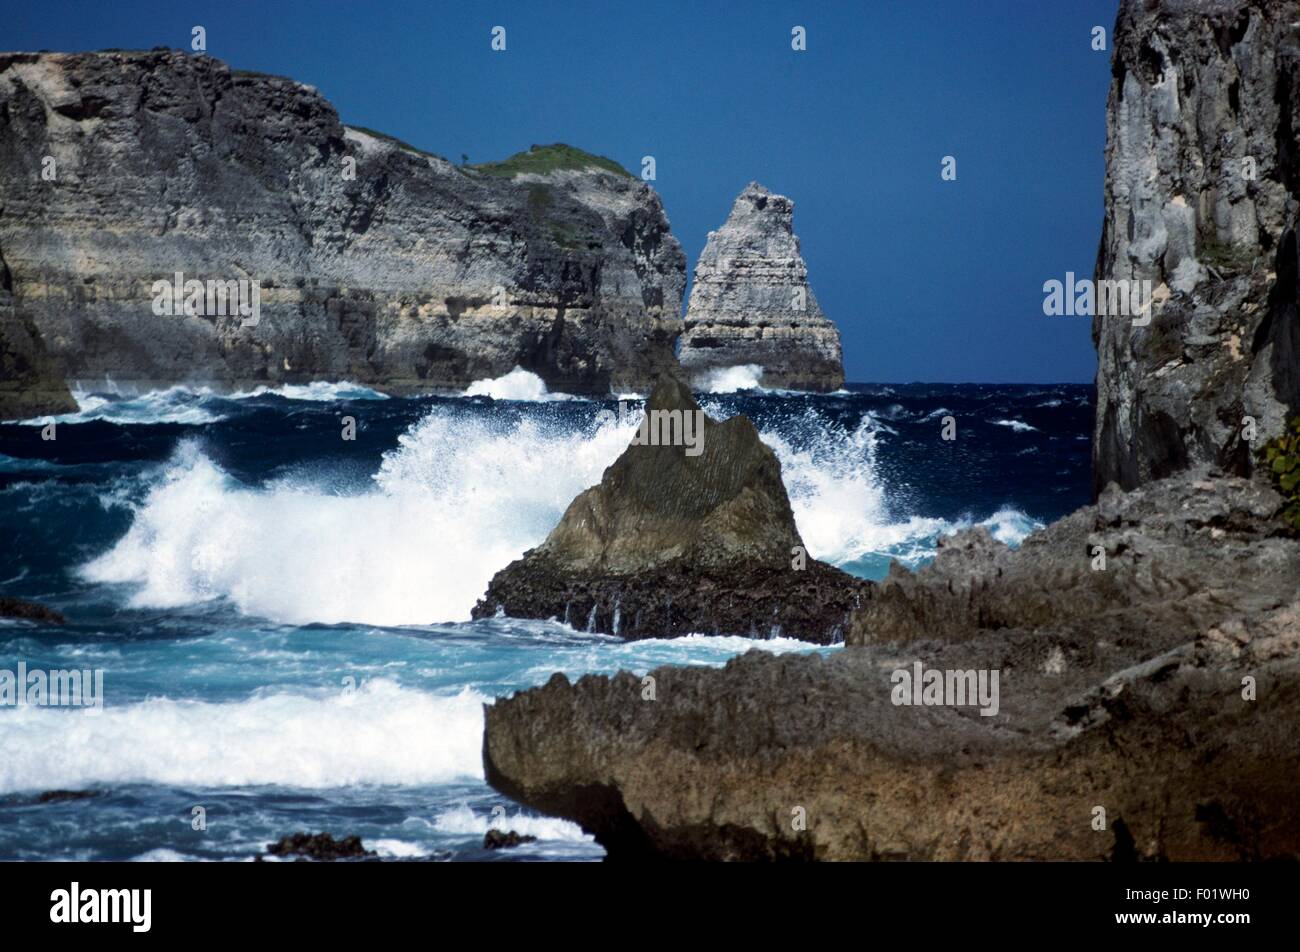 Waves breaking on the rocks of Porte d'Enfer bay, Guadeloupe (French Overseas Territory). Stock Photo